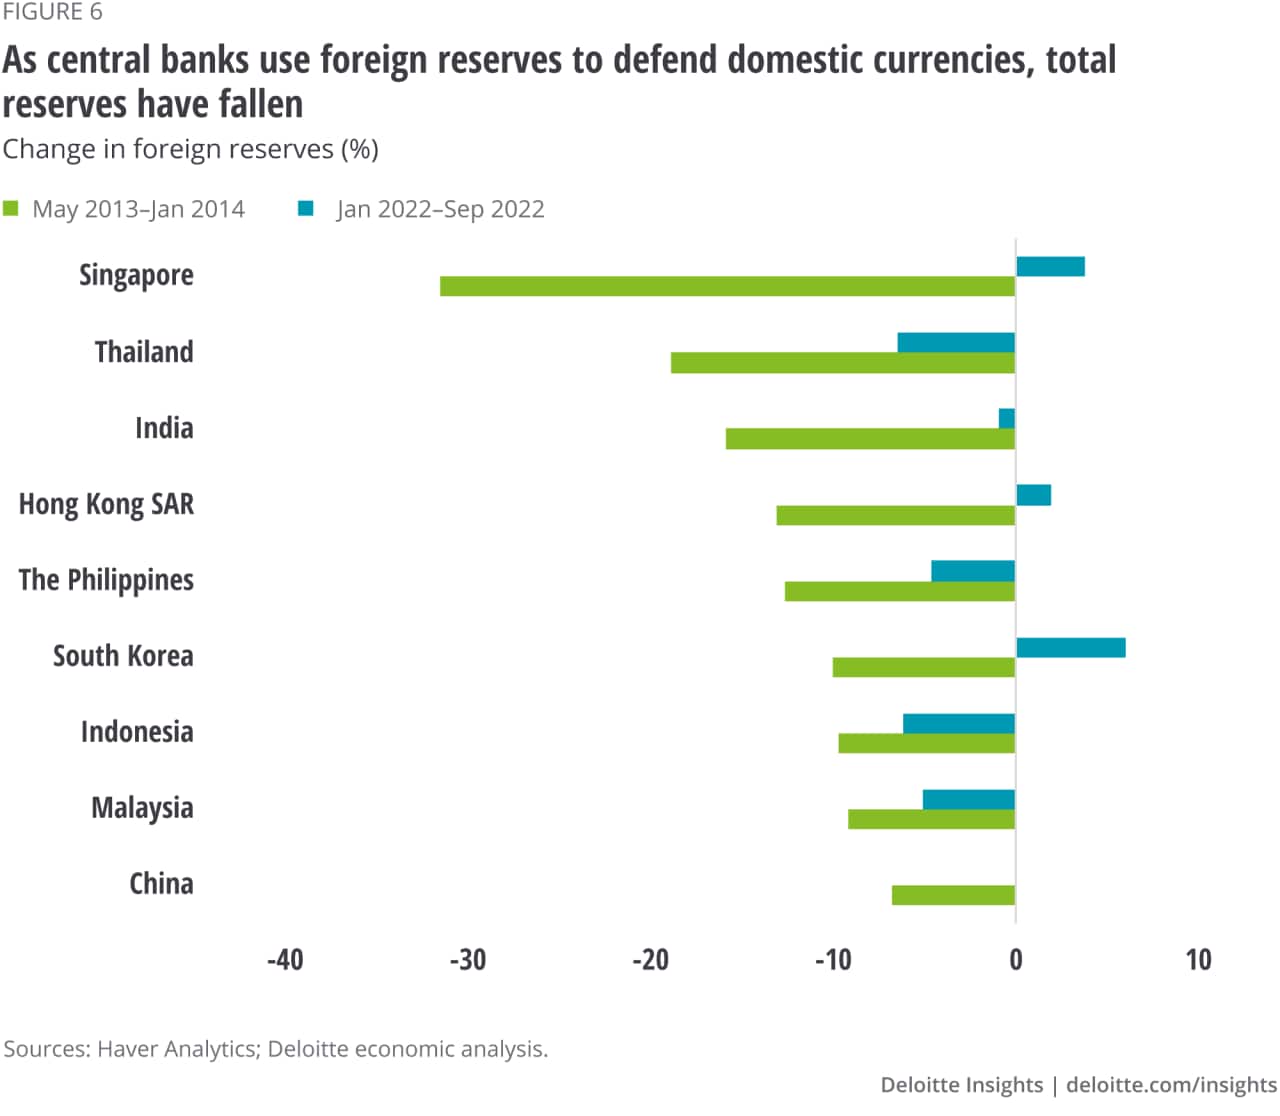 Figure 6. As central banks use foreign reserves to defend domestic currencies, total reserves have fallen